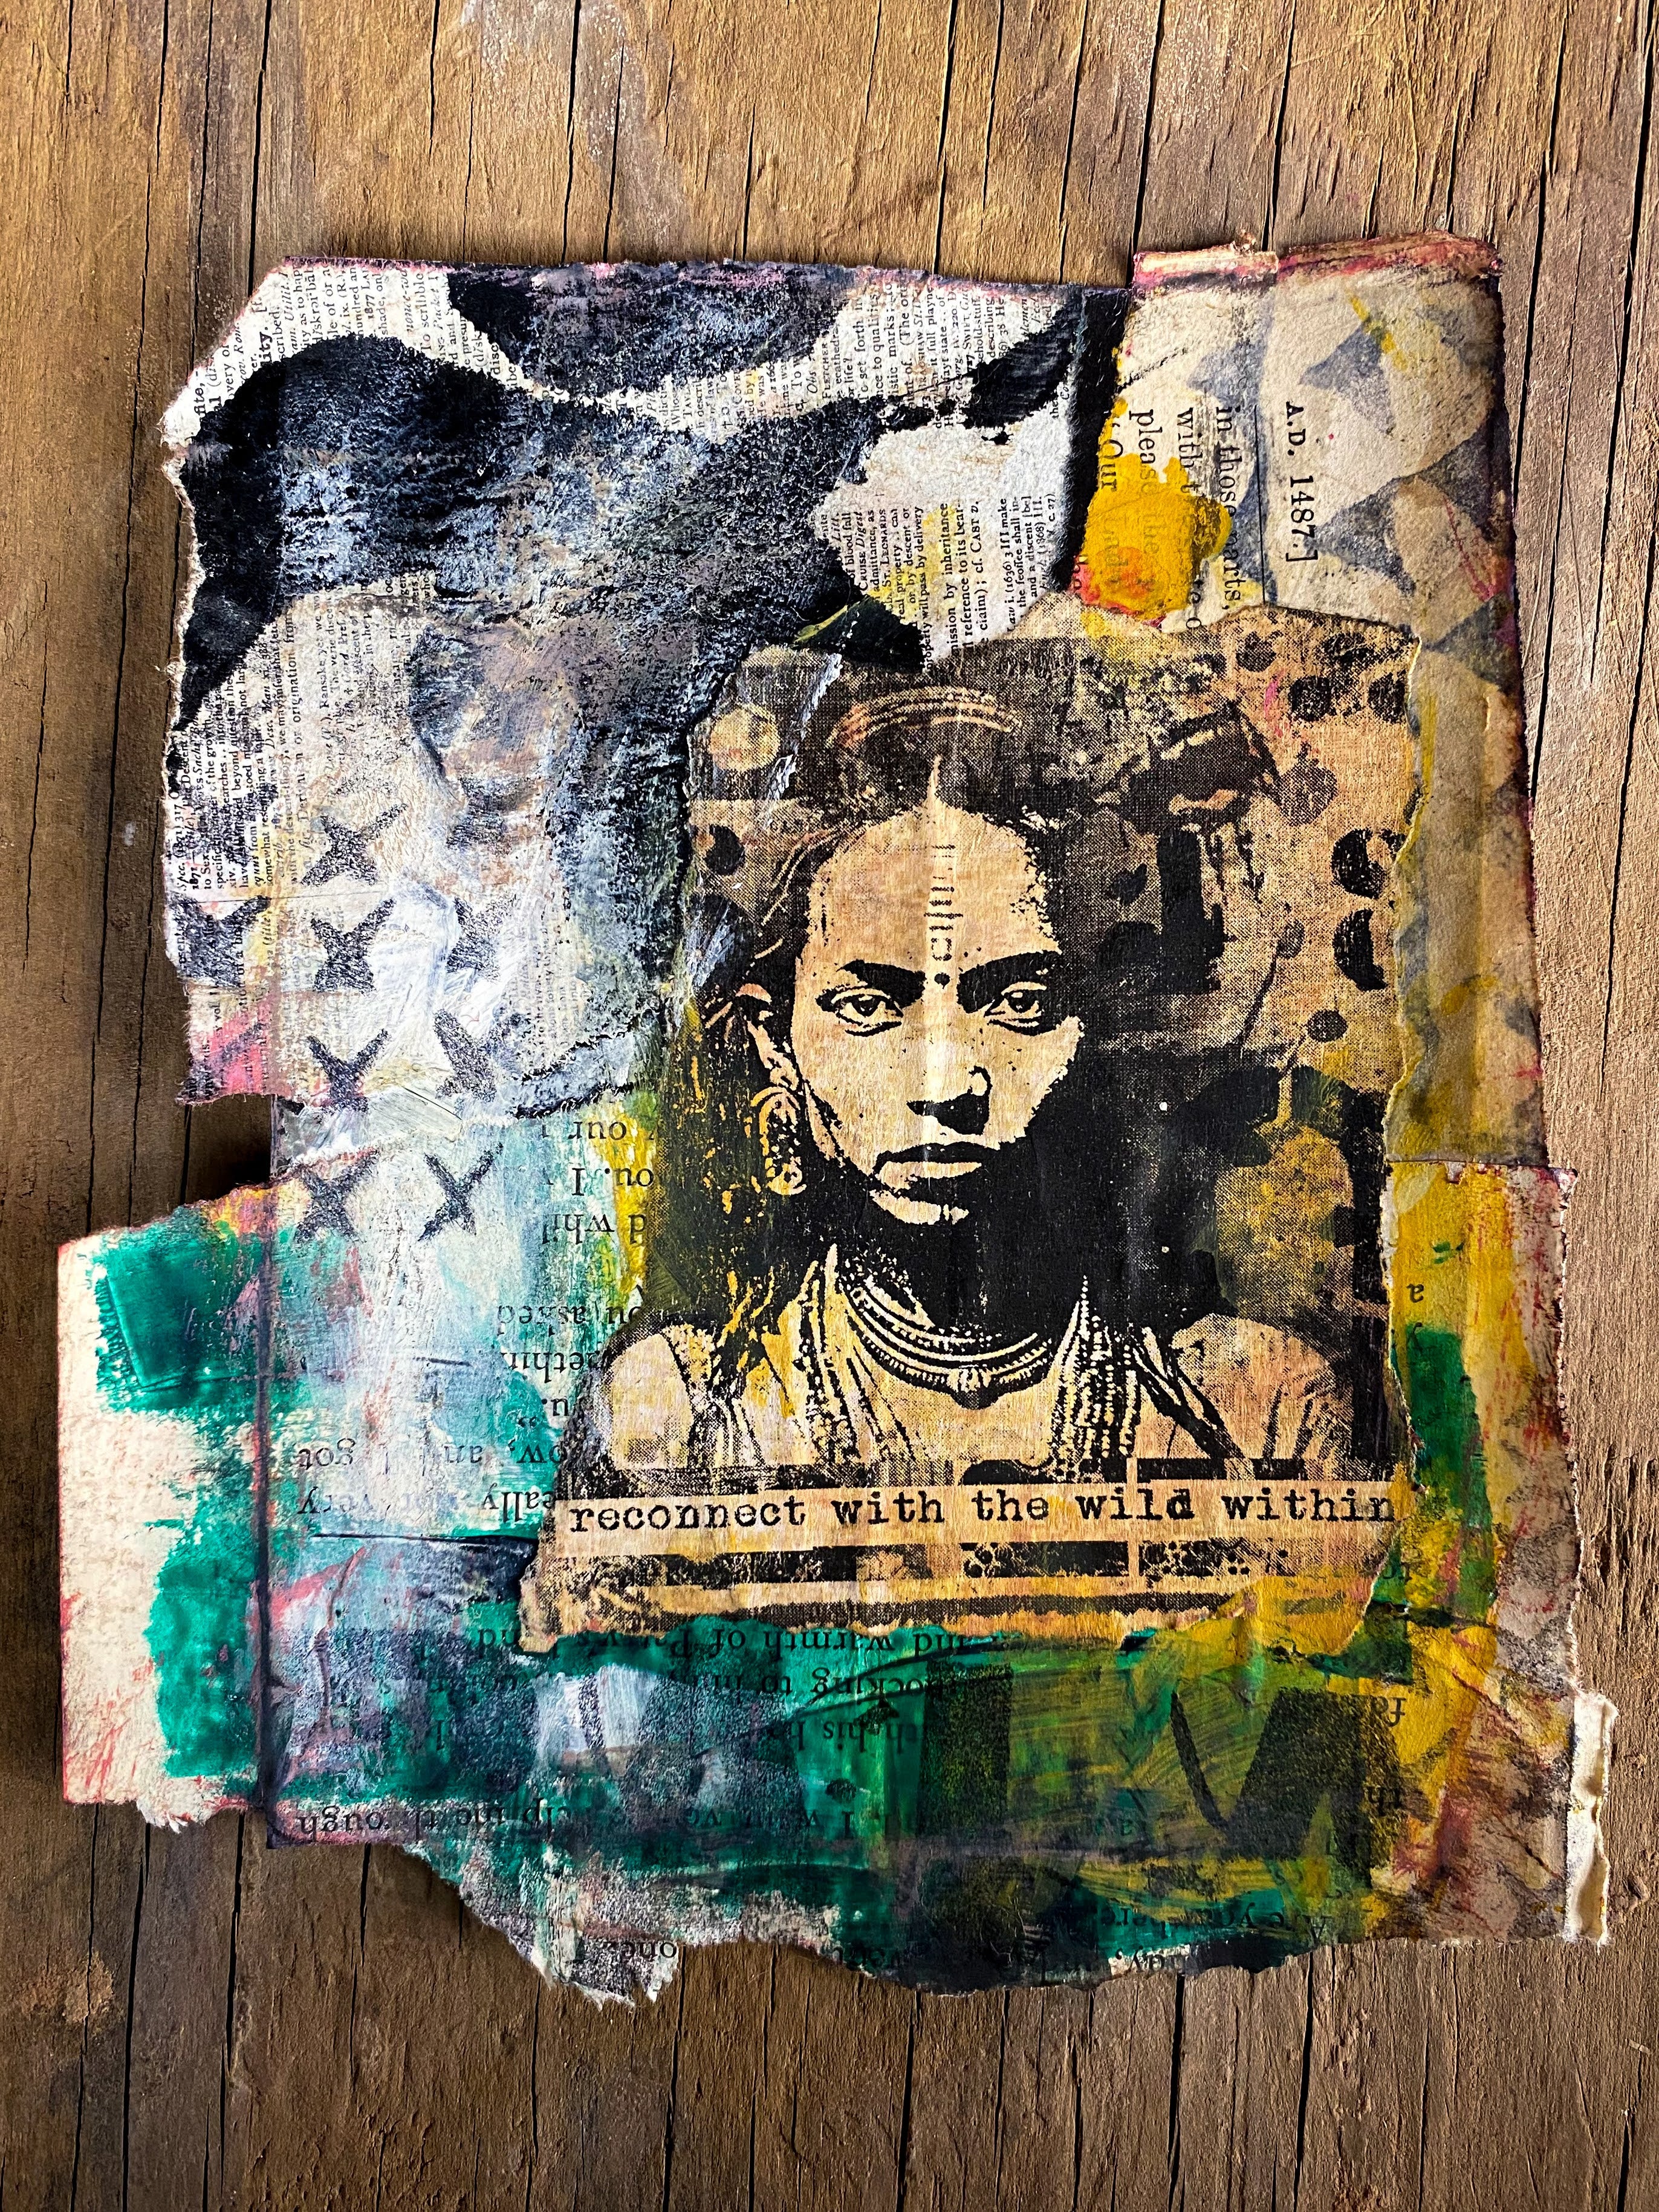 Reconnect with the Wild Within - Original Mixed Media Collage